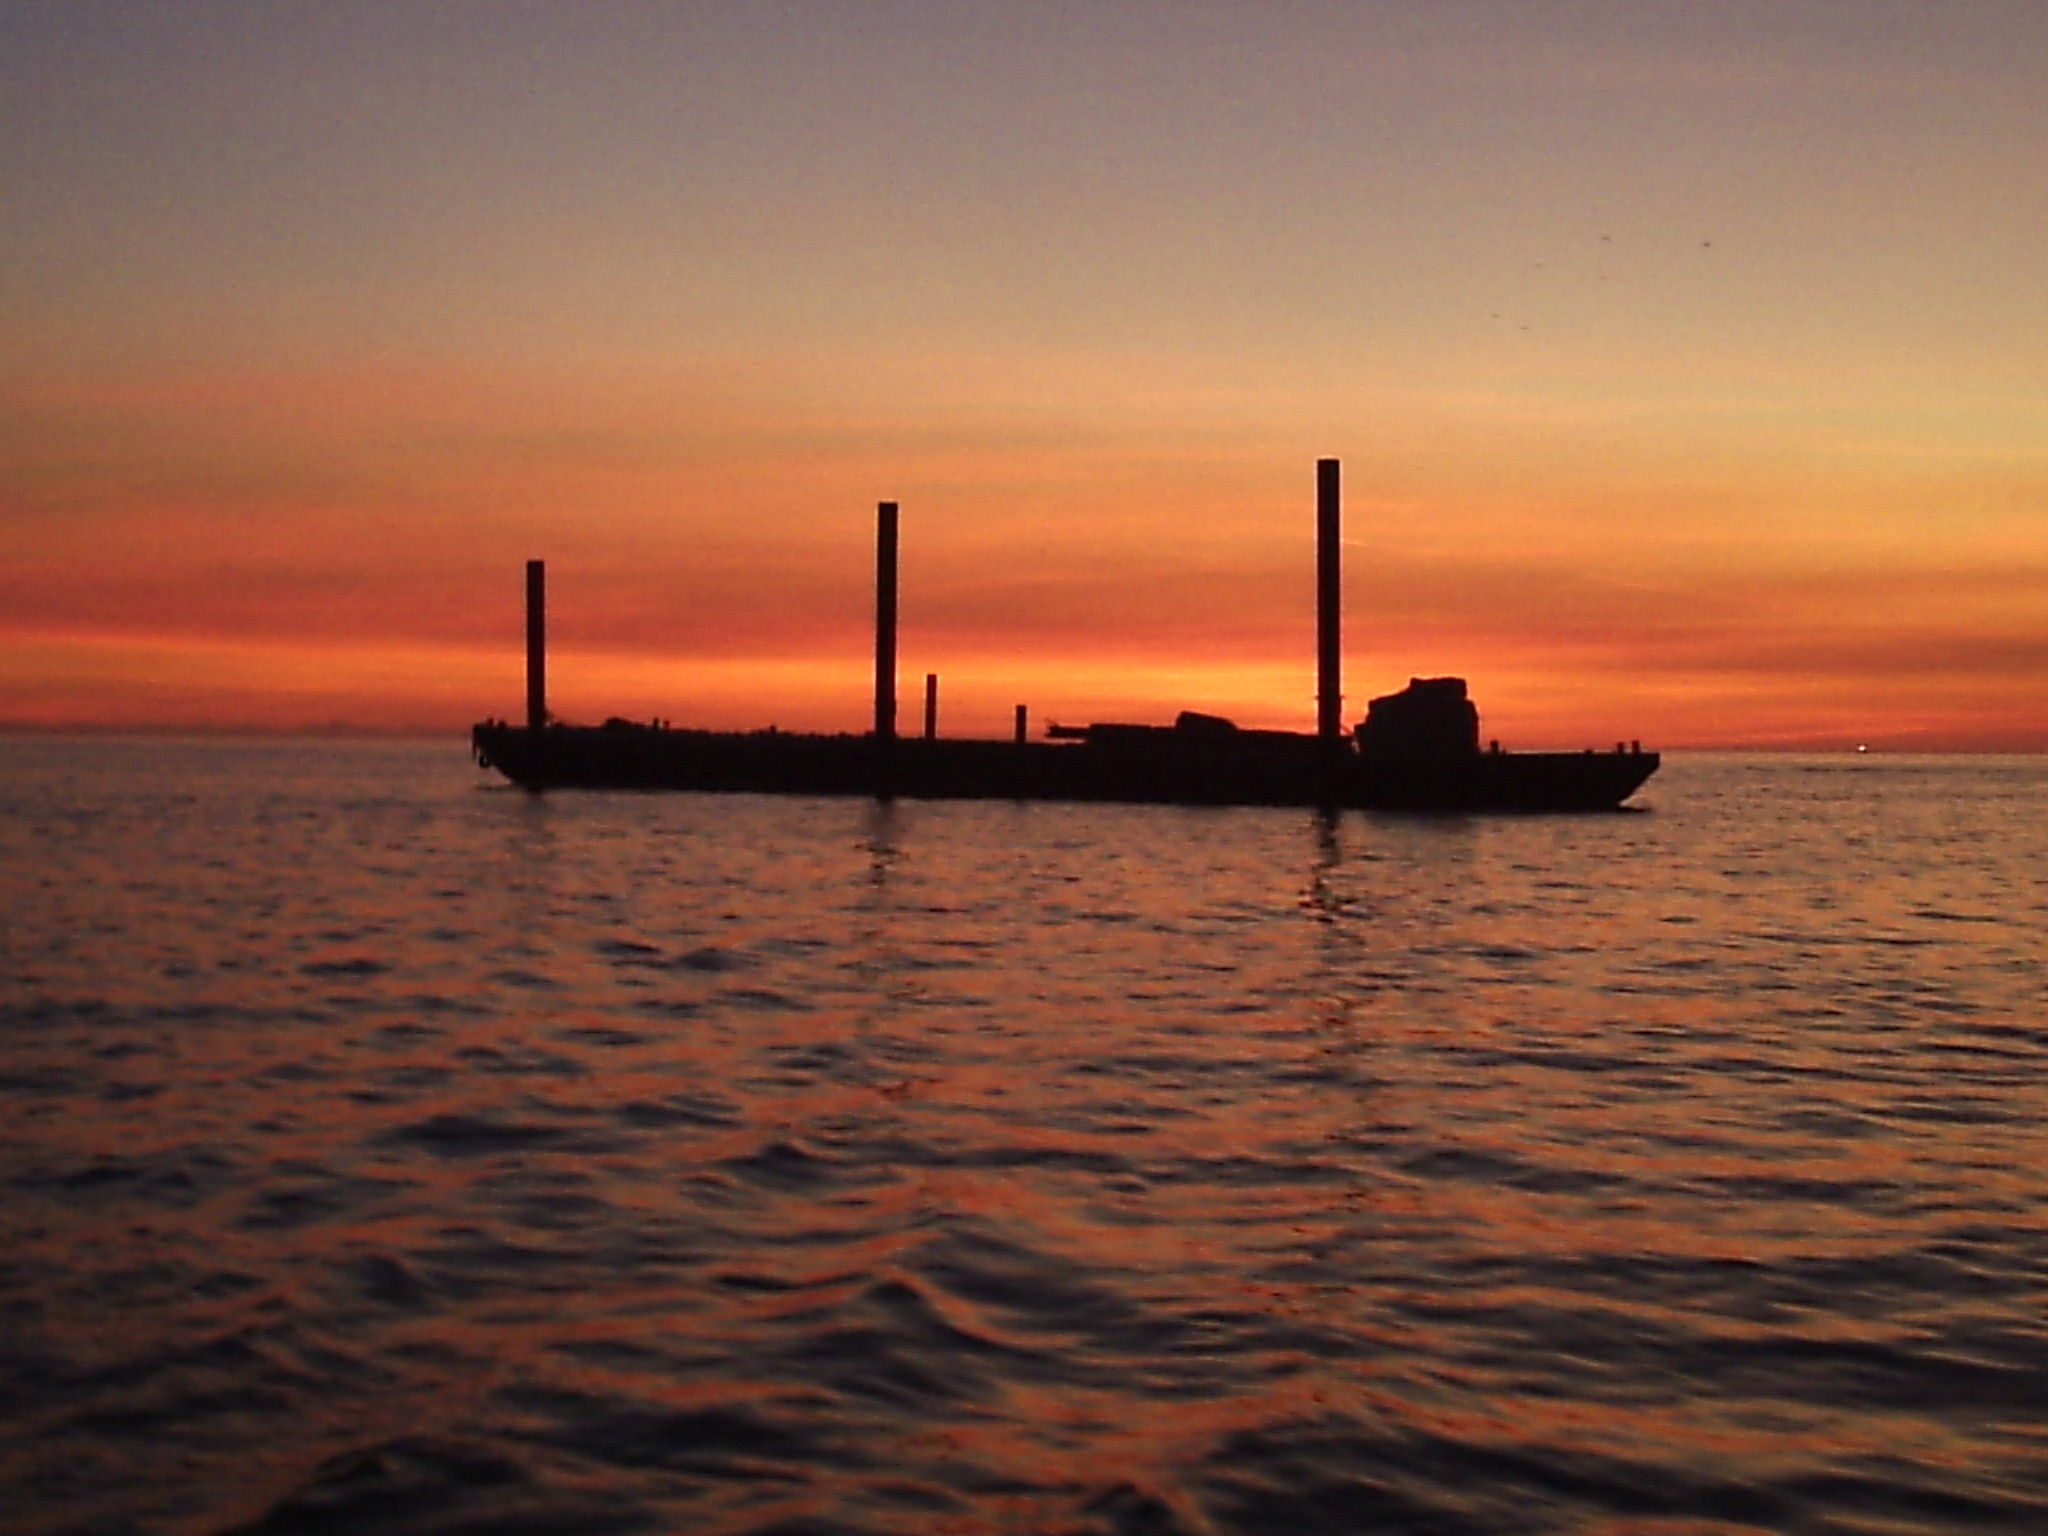 Picture was taken coming back into Johns Pass after watching sunset.  Taken 10/20/06